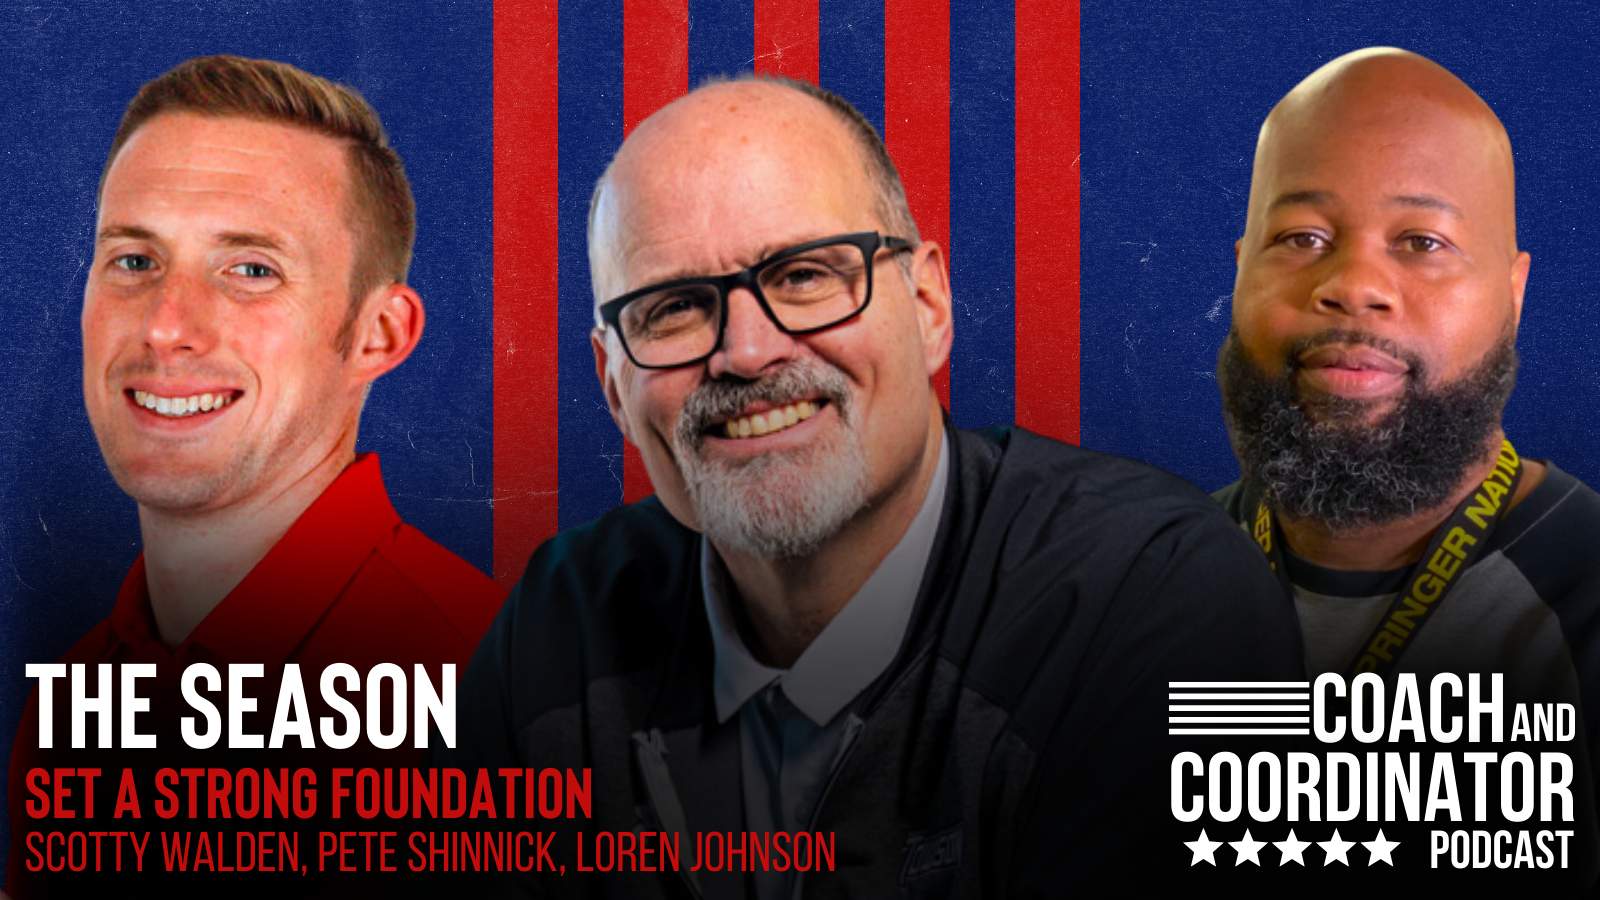 A Strong Foundation with Scotty Walden, Pete Shinnick, and Loren Johnson